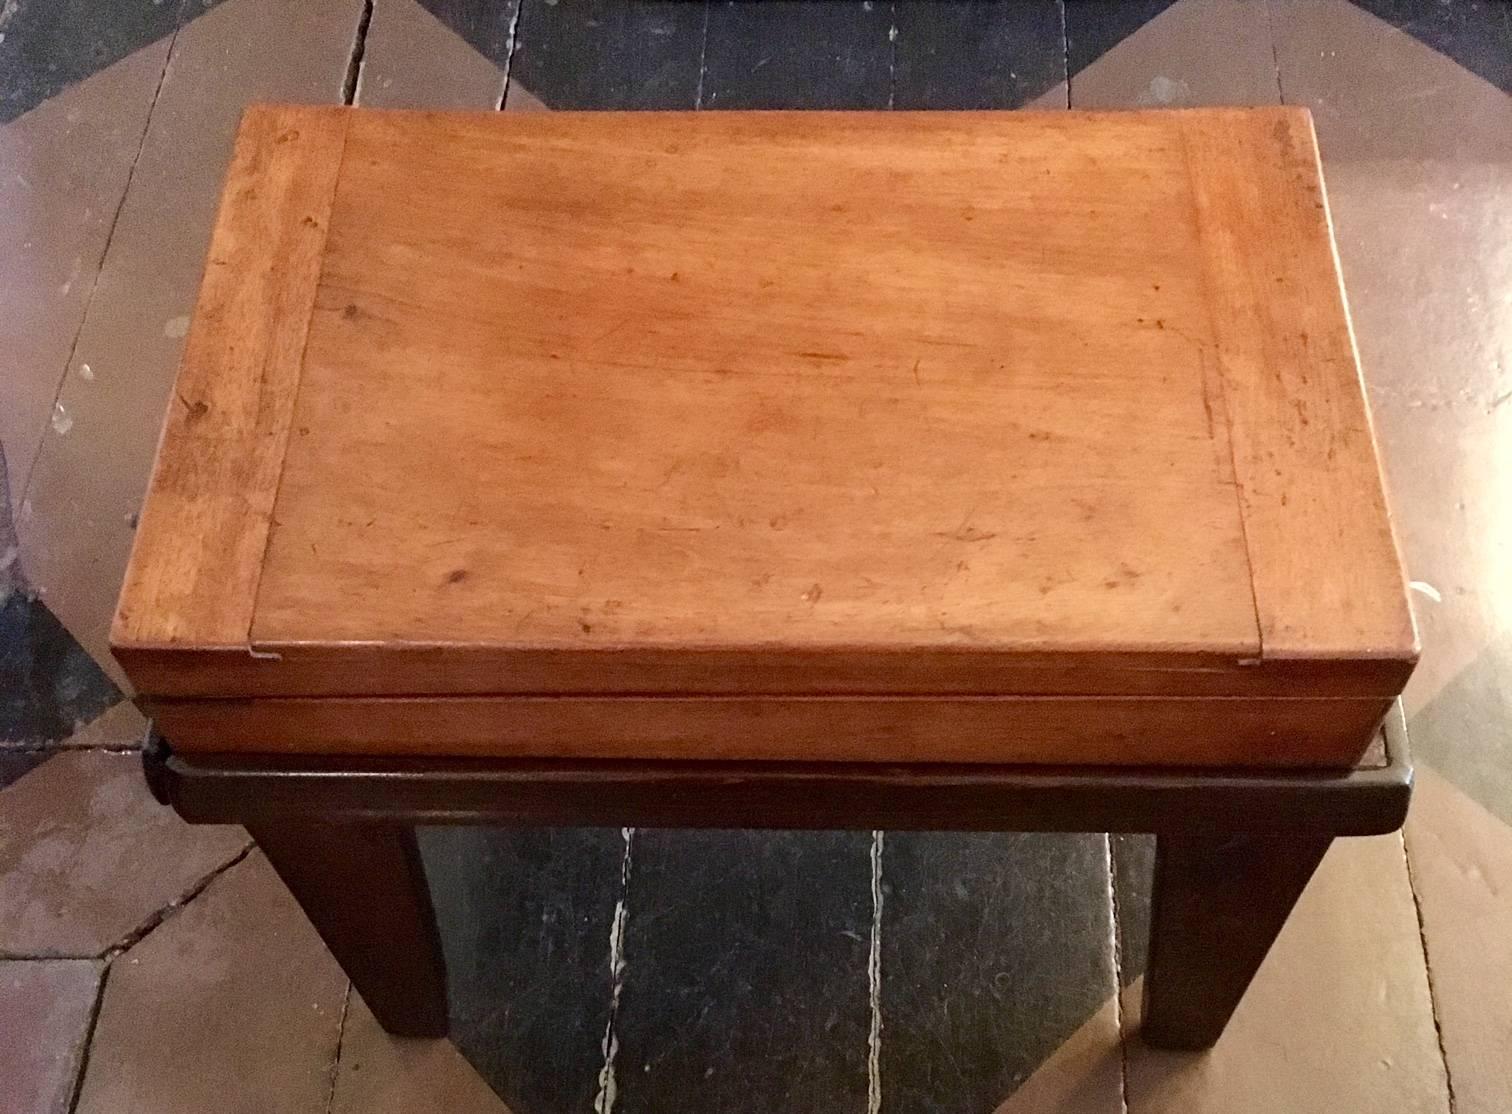 19th century child’s mahogany Bagatelle table, circa 1840, mounted on a period custom base. The shallow rectangular mahogany case is hinged to open as a felt lined playing table, with appropriate depressions and shaped corners, set upon a fitted